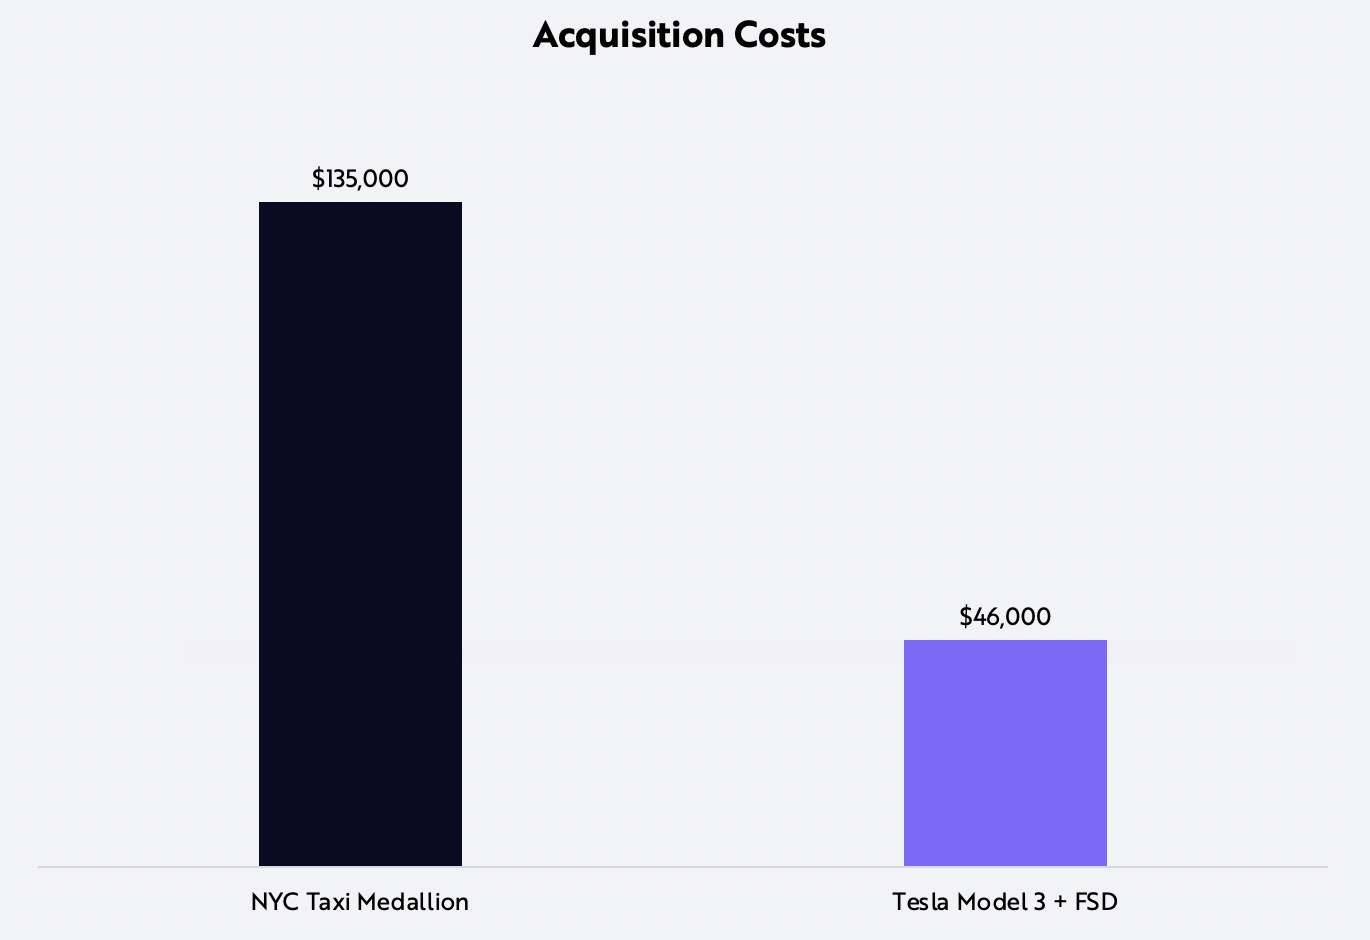 ride-hailing, Tesla, acquisition cost